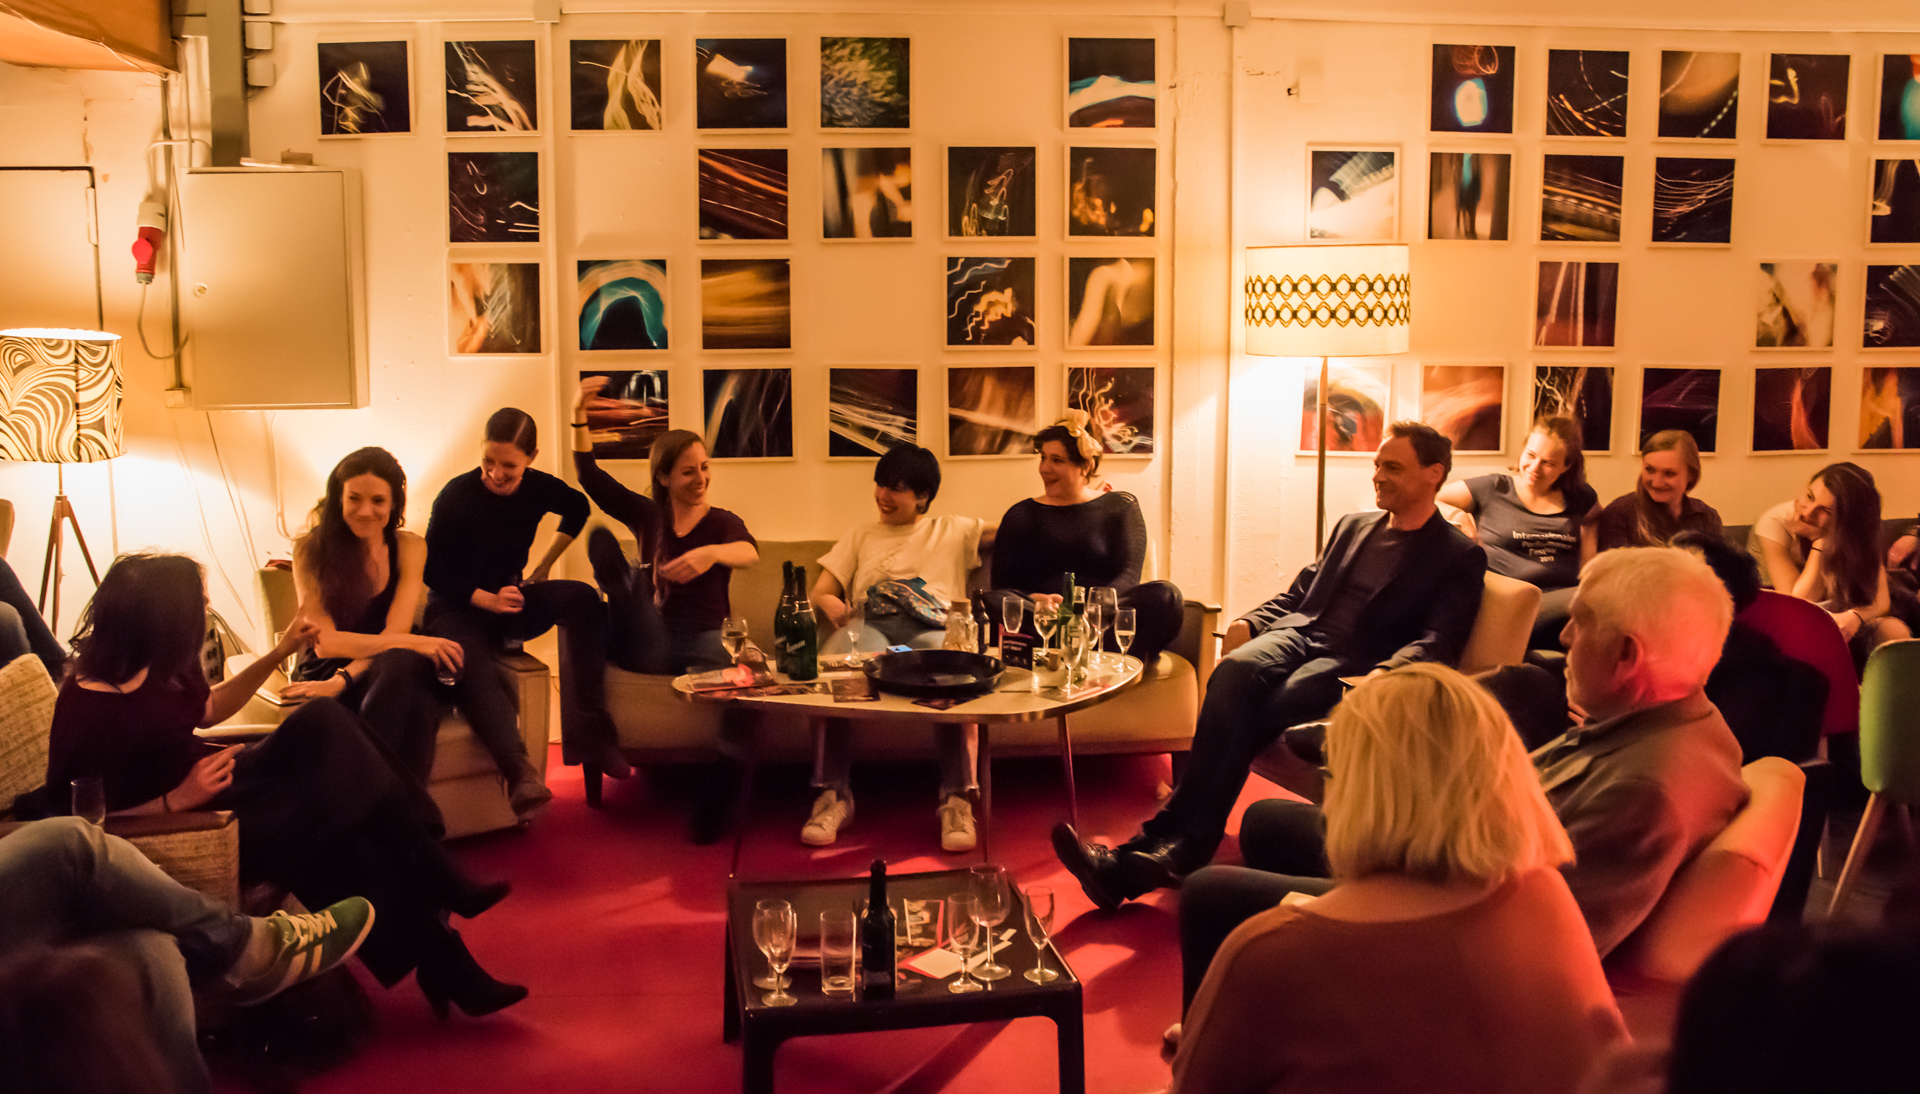 During our festival, the artist talks are held in the cosy ambience of our lounge
© Chang-Chih Chen